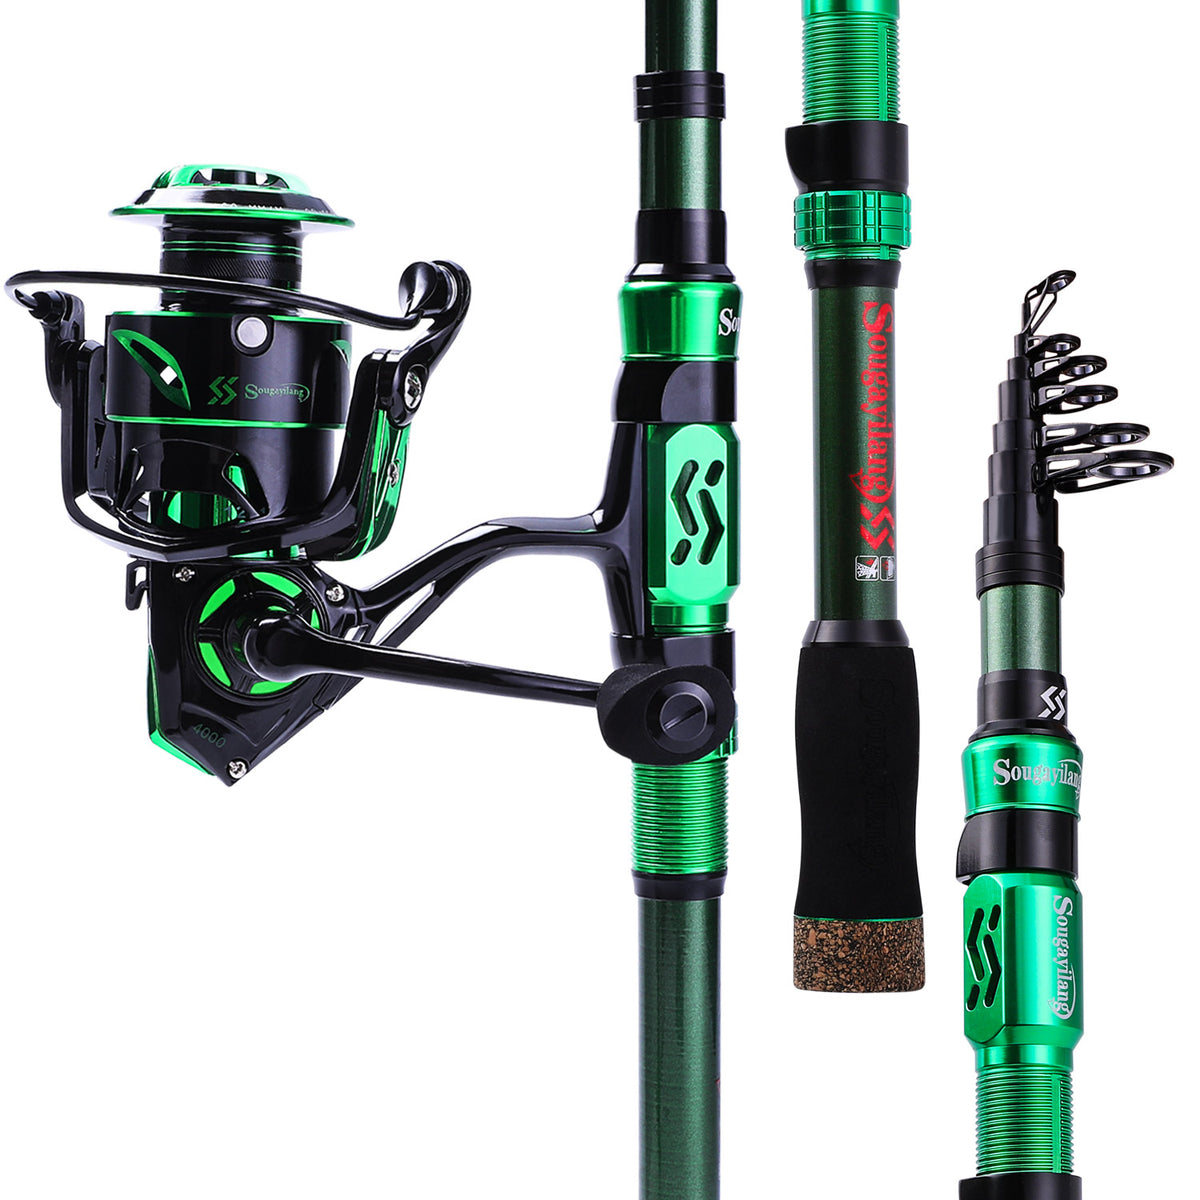 Sougayilang Fishing Rod Reel Combo，Carbon Fiber Protable Spinning Fishing  Pole and Colorful Spinning Reel for Travel 4 Pieces Freshwater